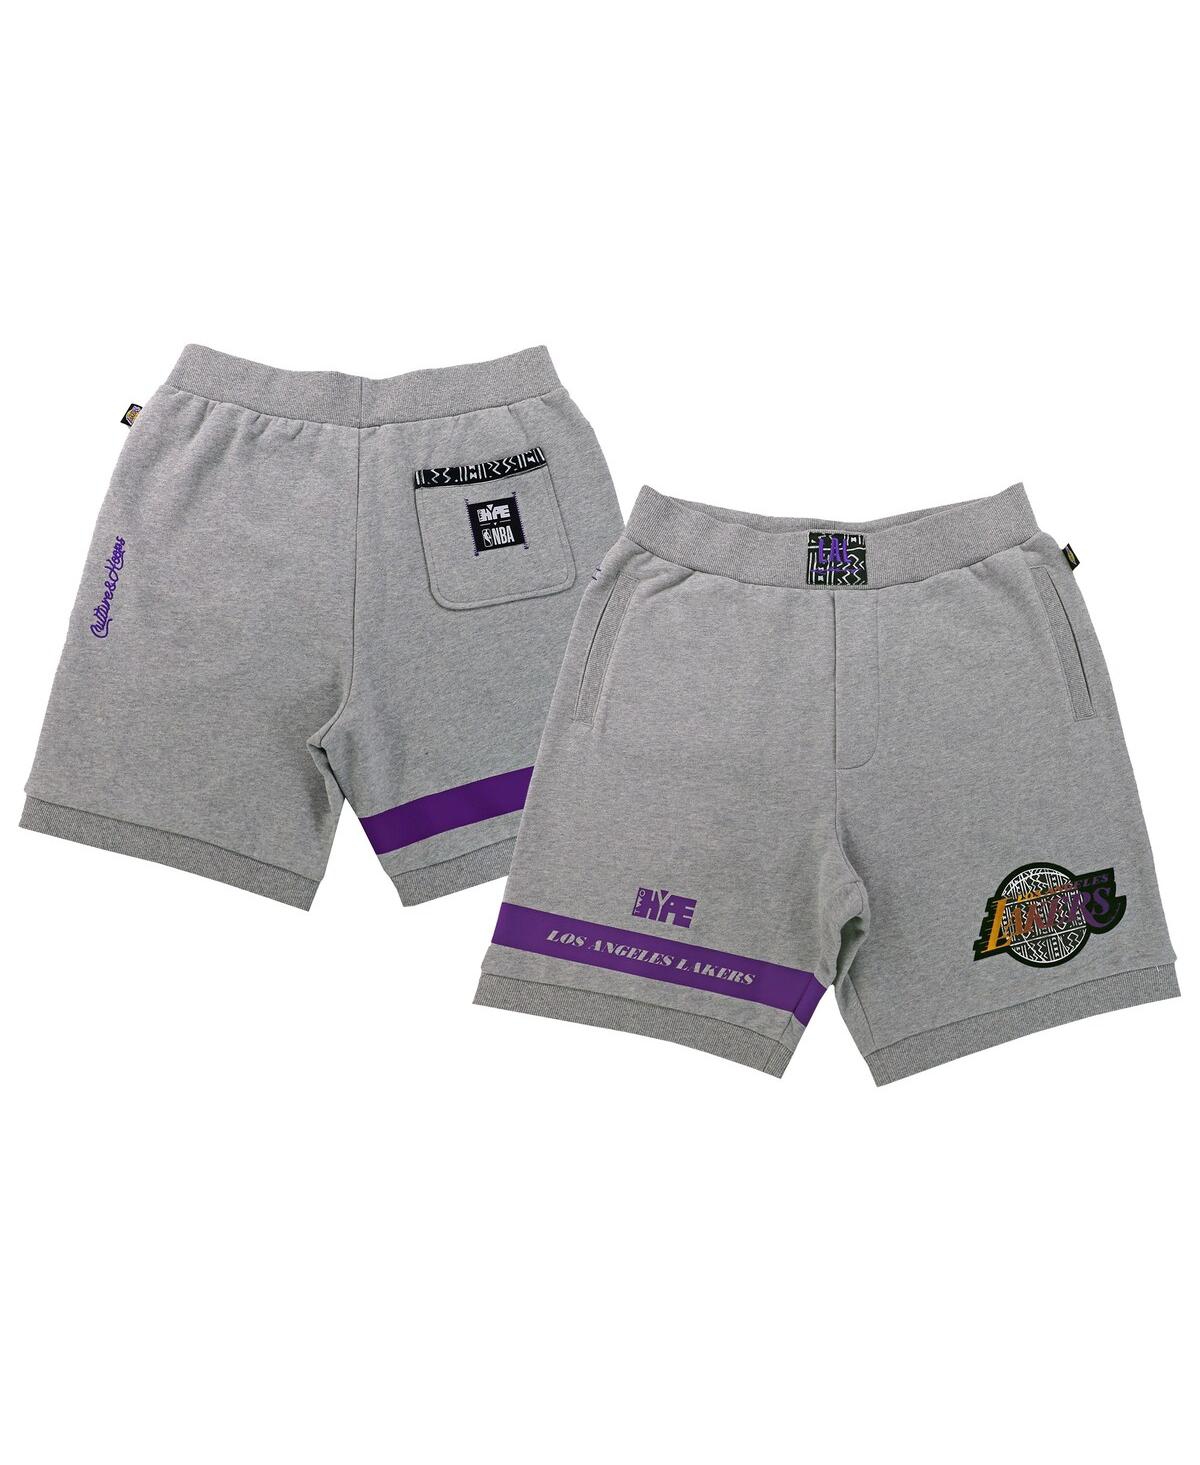 Men's and Women's Nba x Two Hype Heather Gray Los Angeles Lakers Culture and Hoops Premium Classic Fleece Shorts - Heather Gray